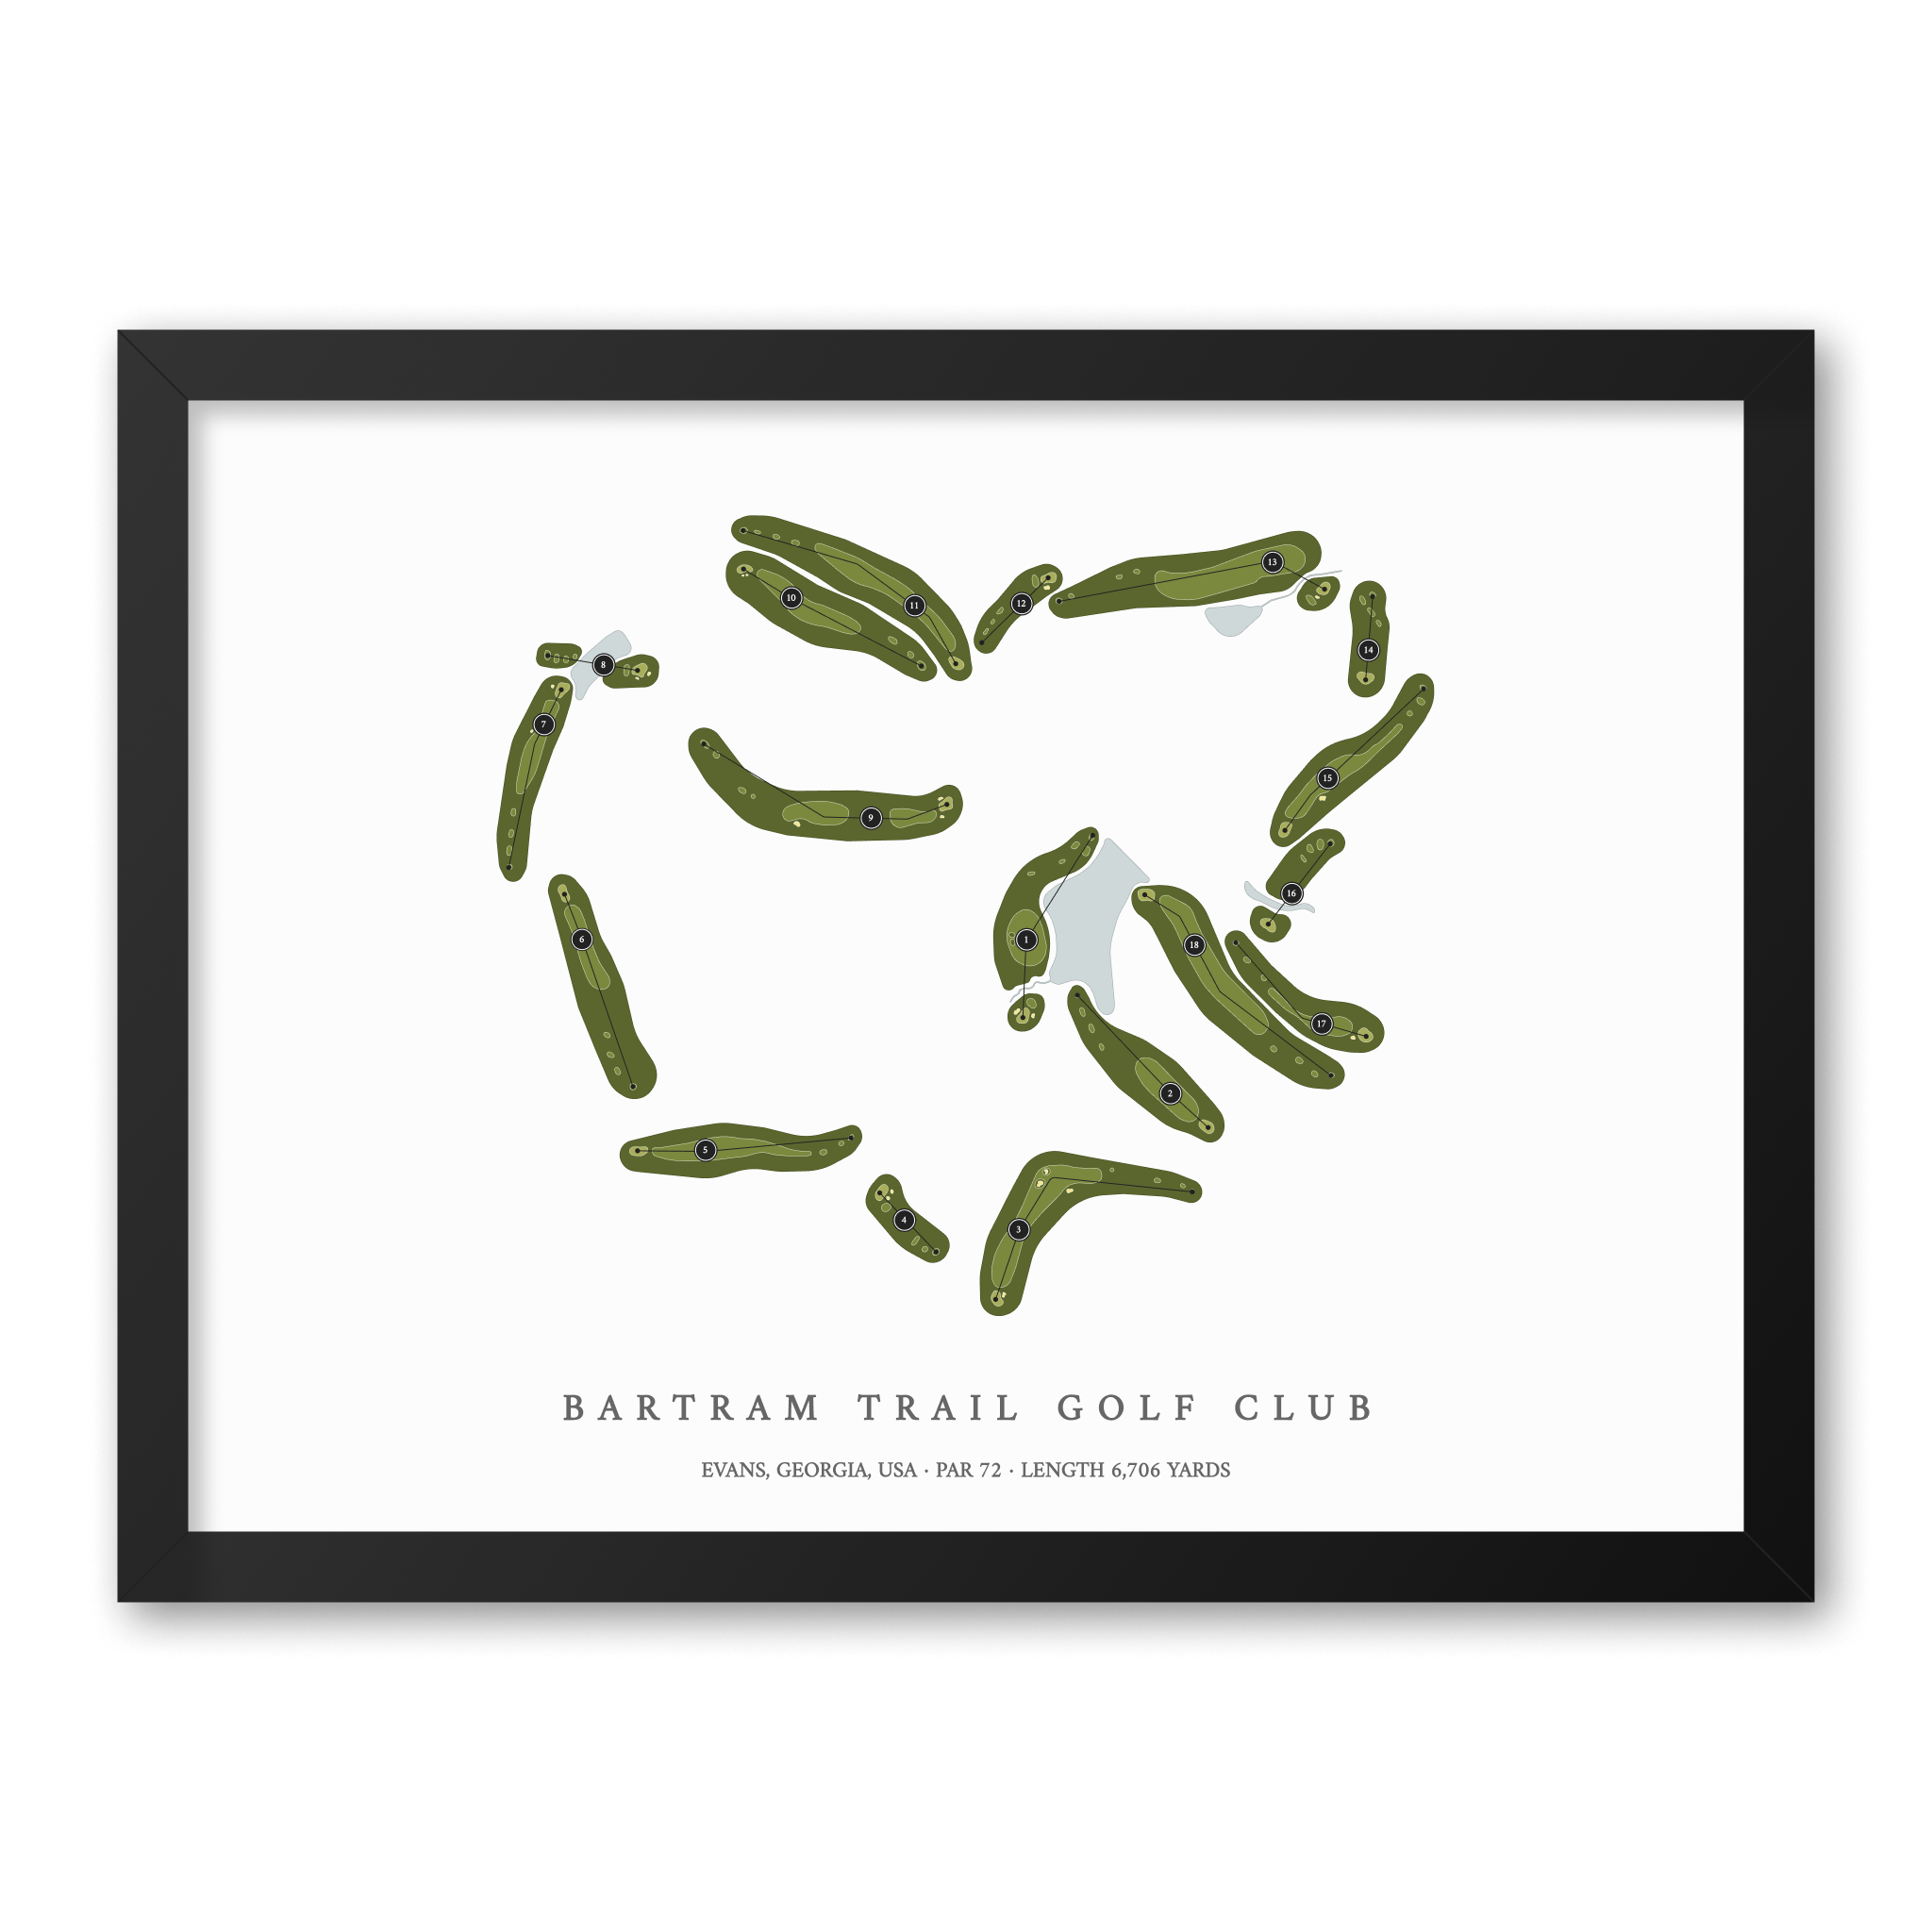 Bartram Trail Golf Club | Golf Course Map | Black Frame With Hole Numbers #hole numbers_yes